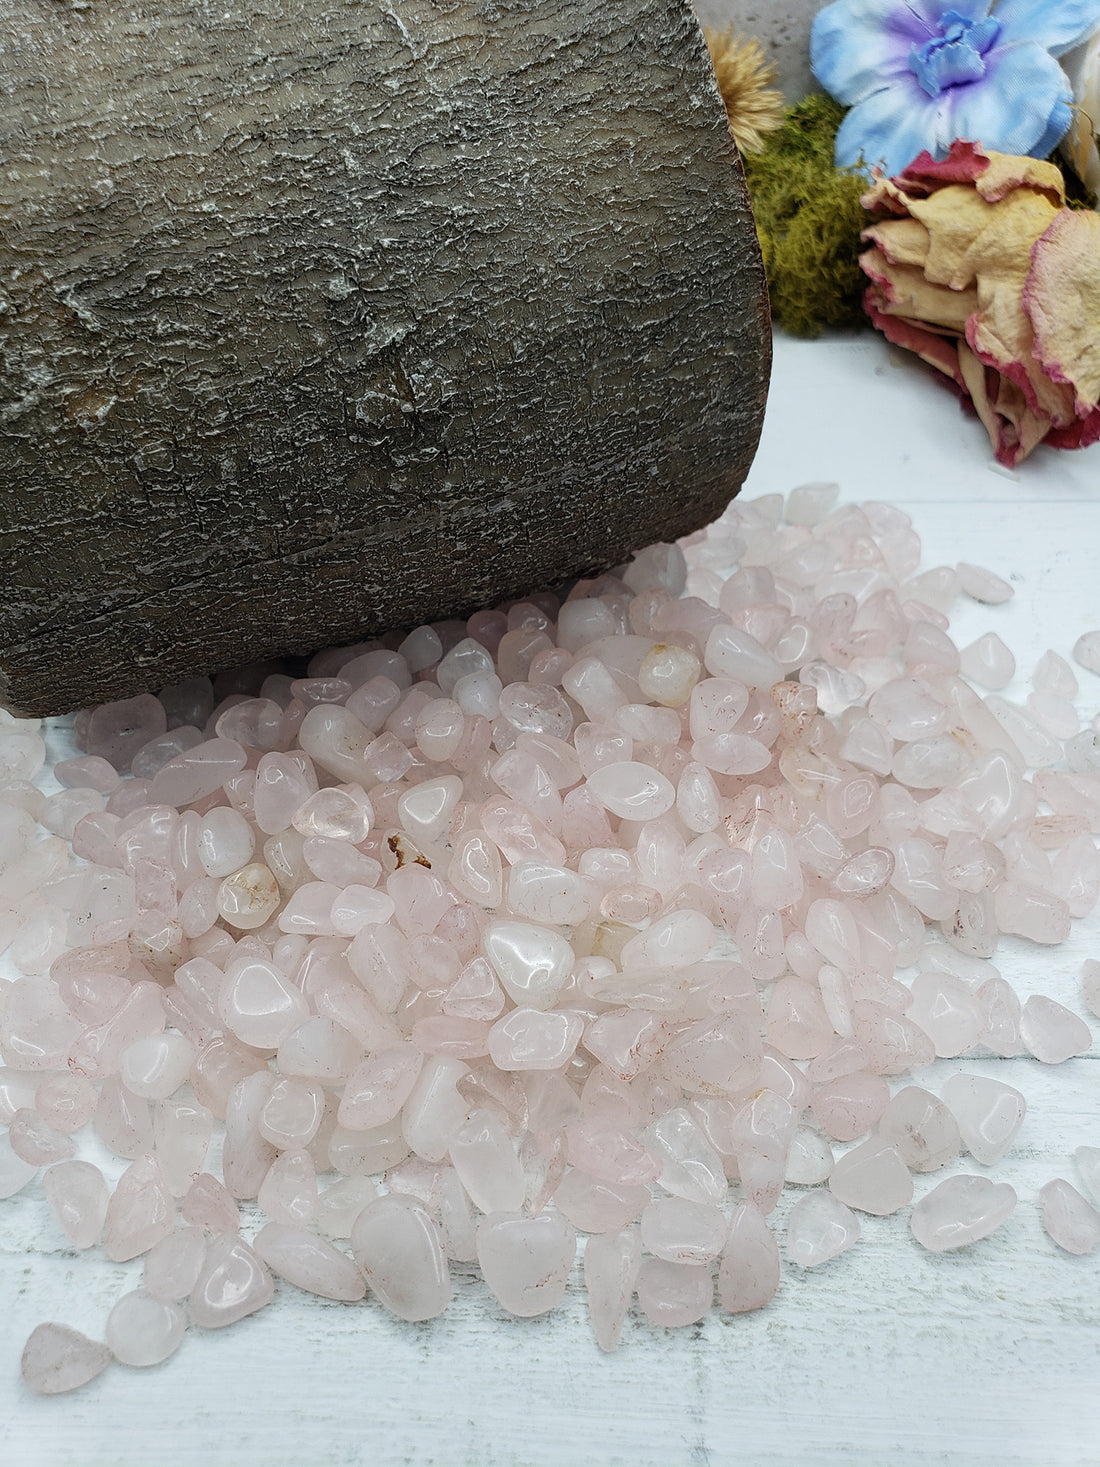 six ounces of rose quartz chips on display